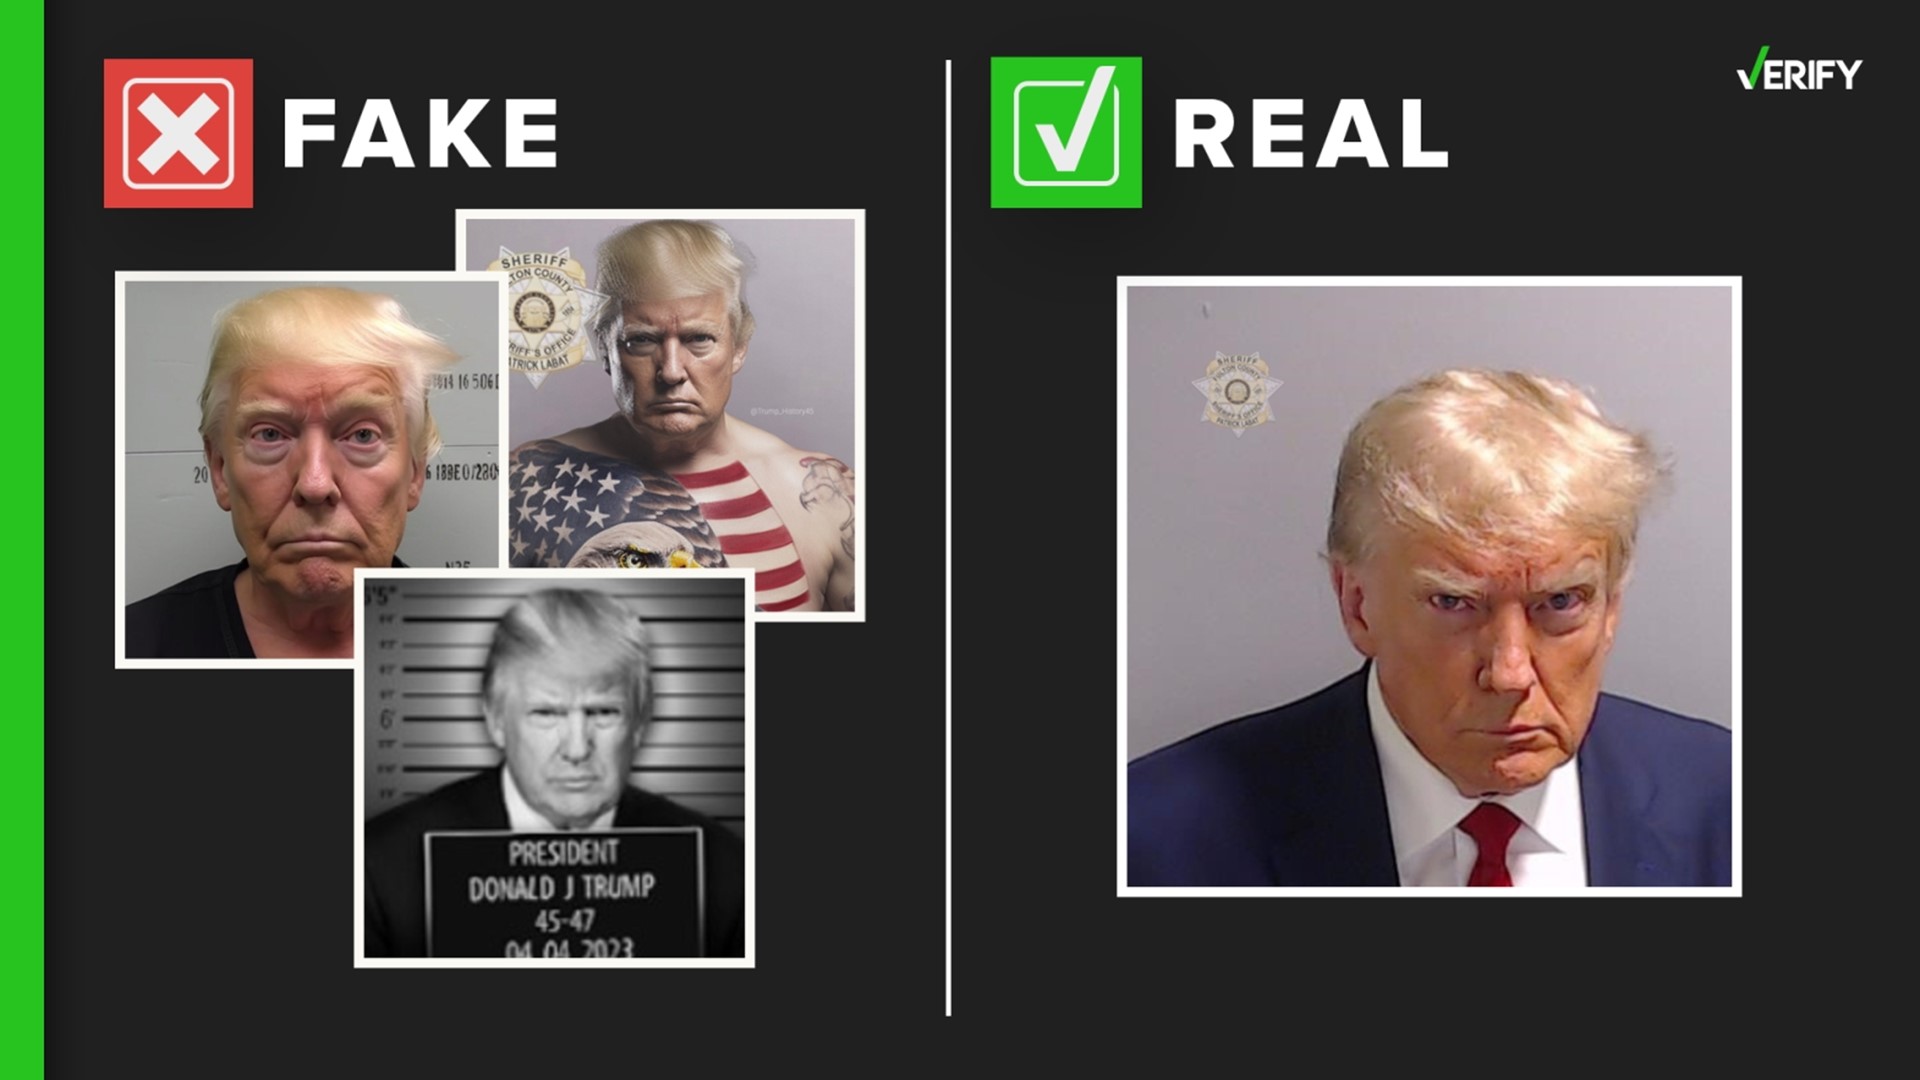 Donald Trump was booked into the Fulton County Jail on Aug. 24 and had his mug shot taken. Here’s the real photo compared with fakes circulating online.